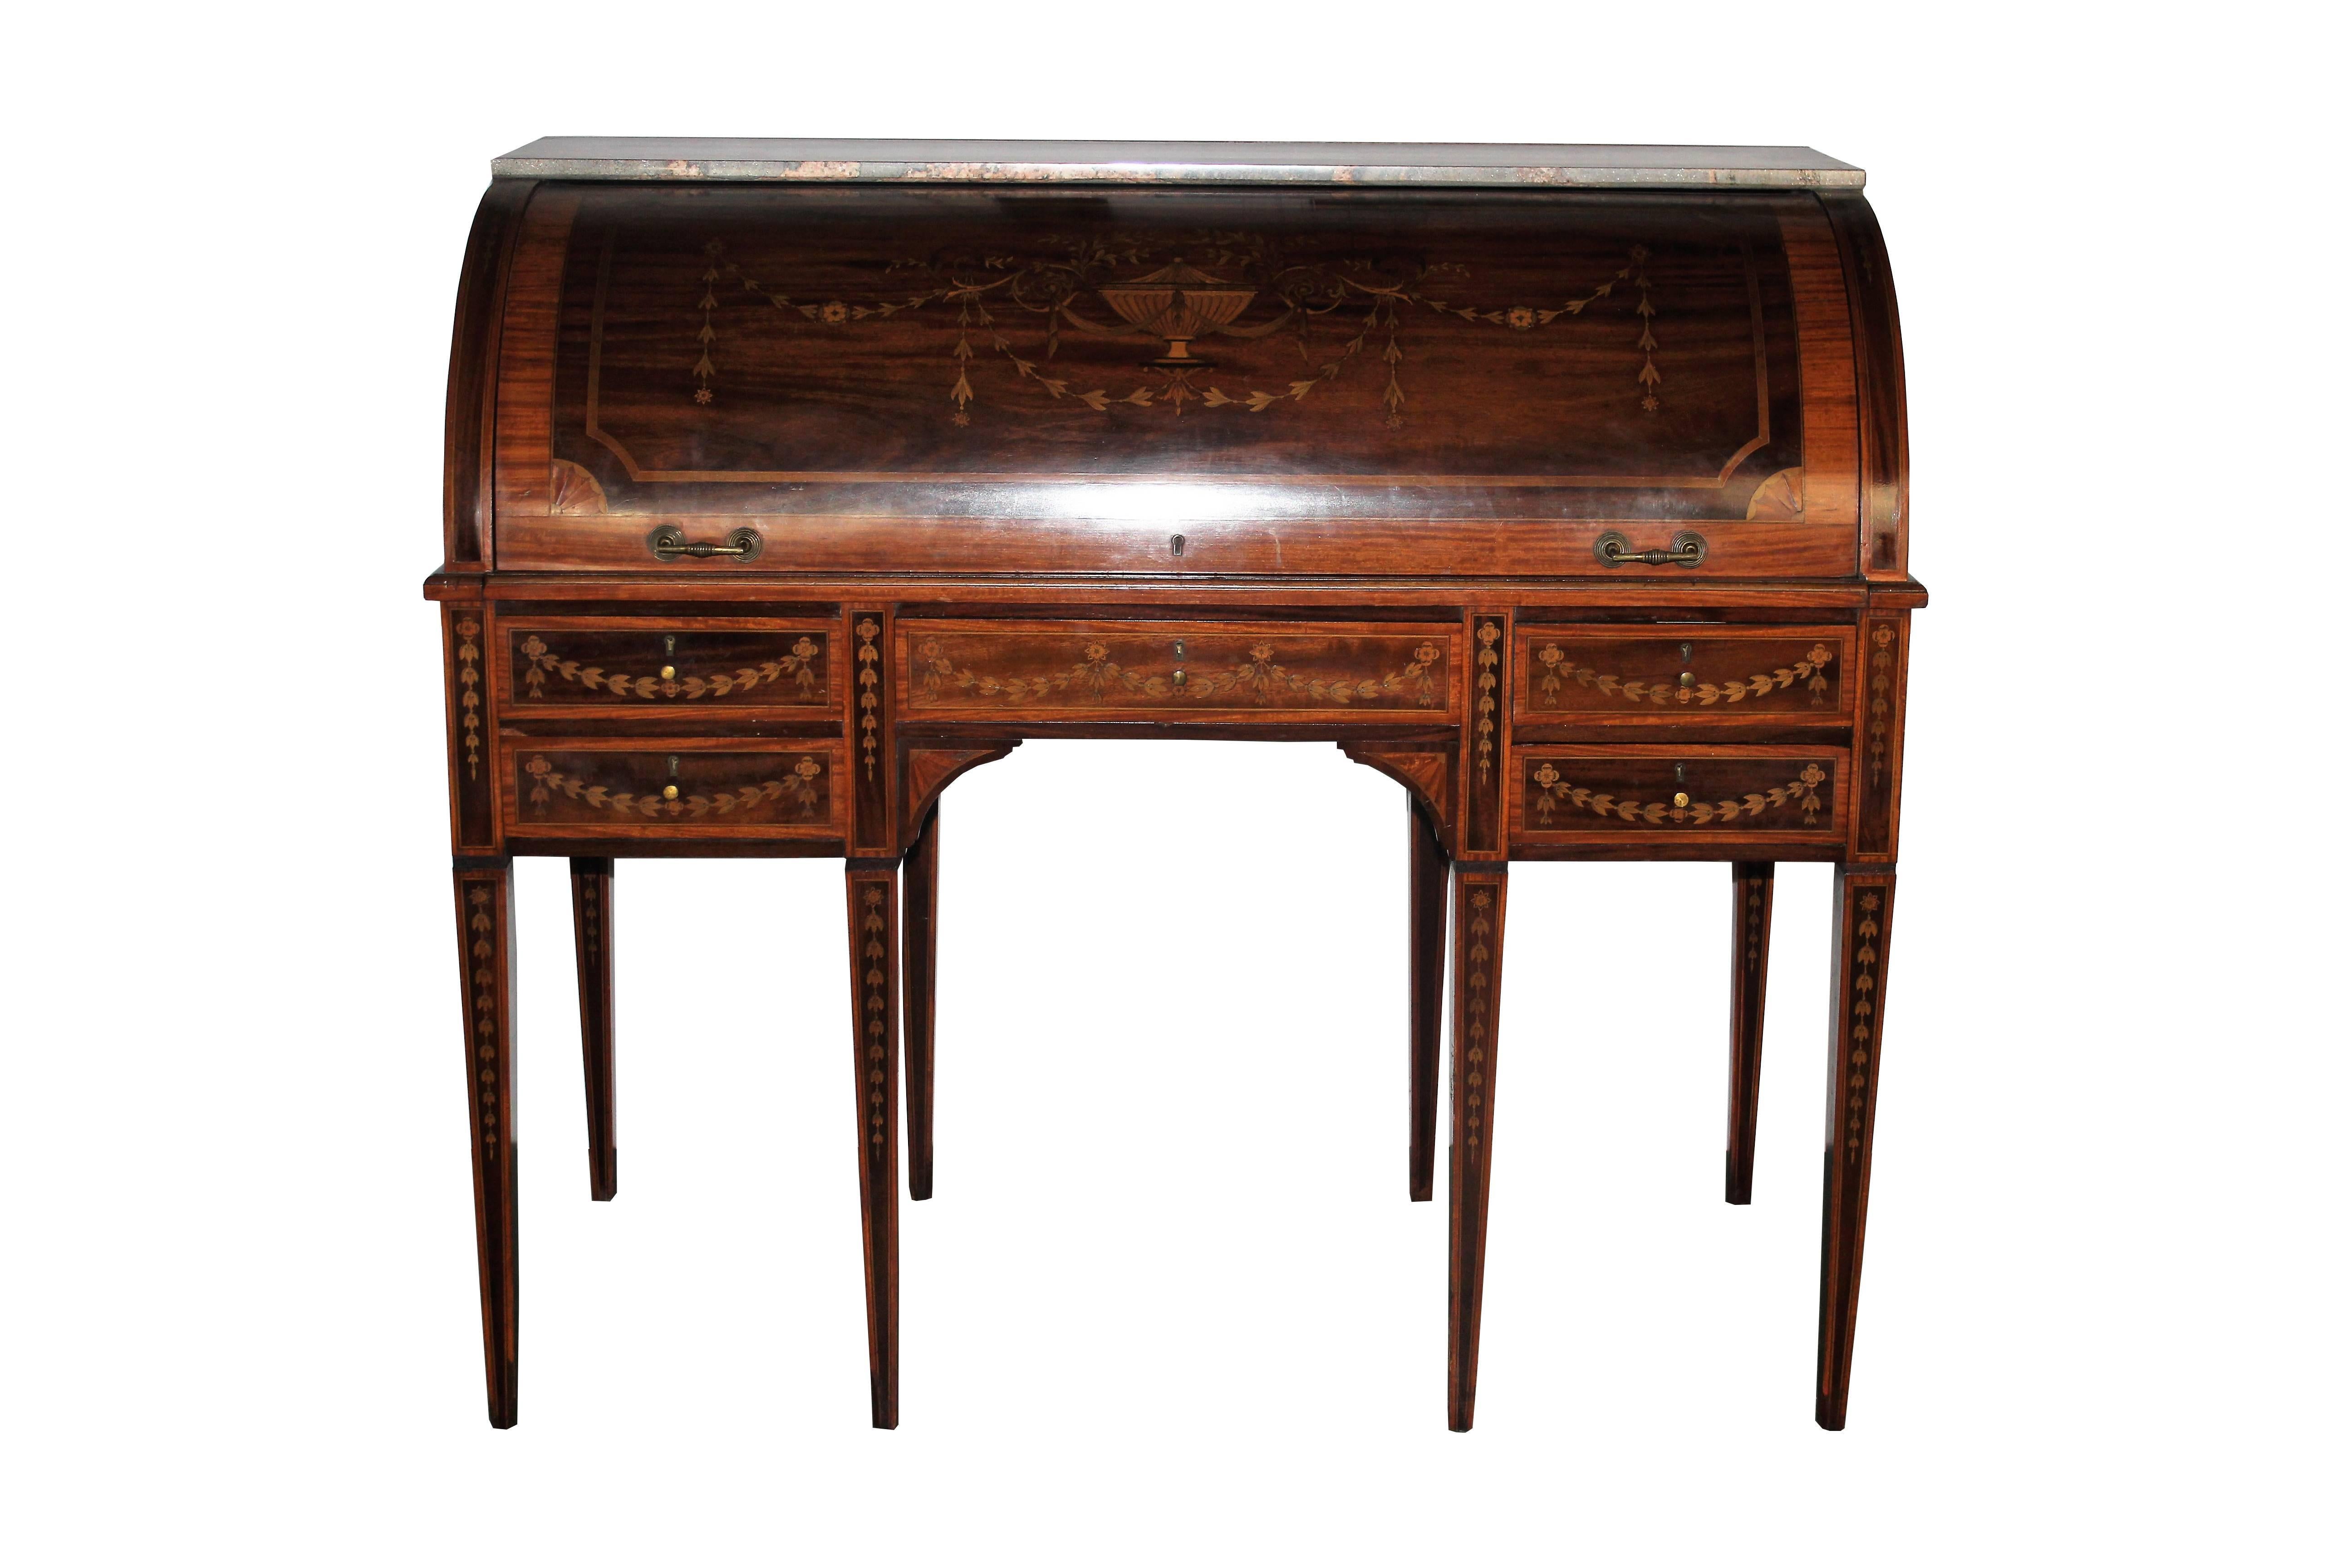 Wonderful quality English cylinder desk. Mahogany and satinwood inlaid with flower swags and urn all around. The interior is cross banded has pull-out writing surface with tooled leather. The marble has been placed latter.